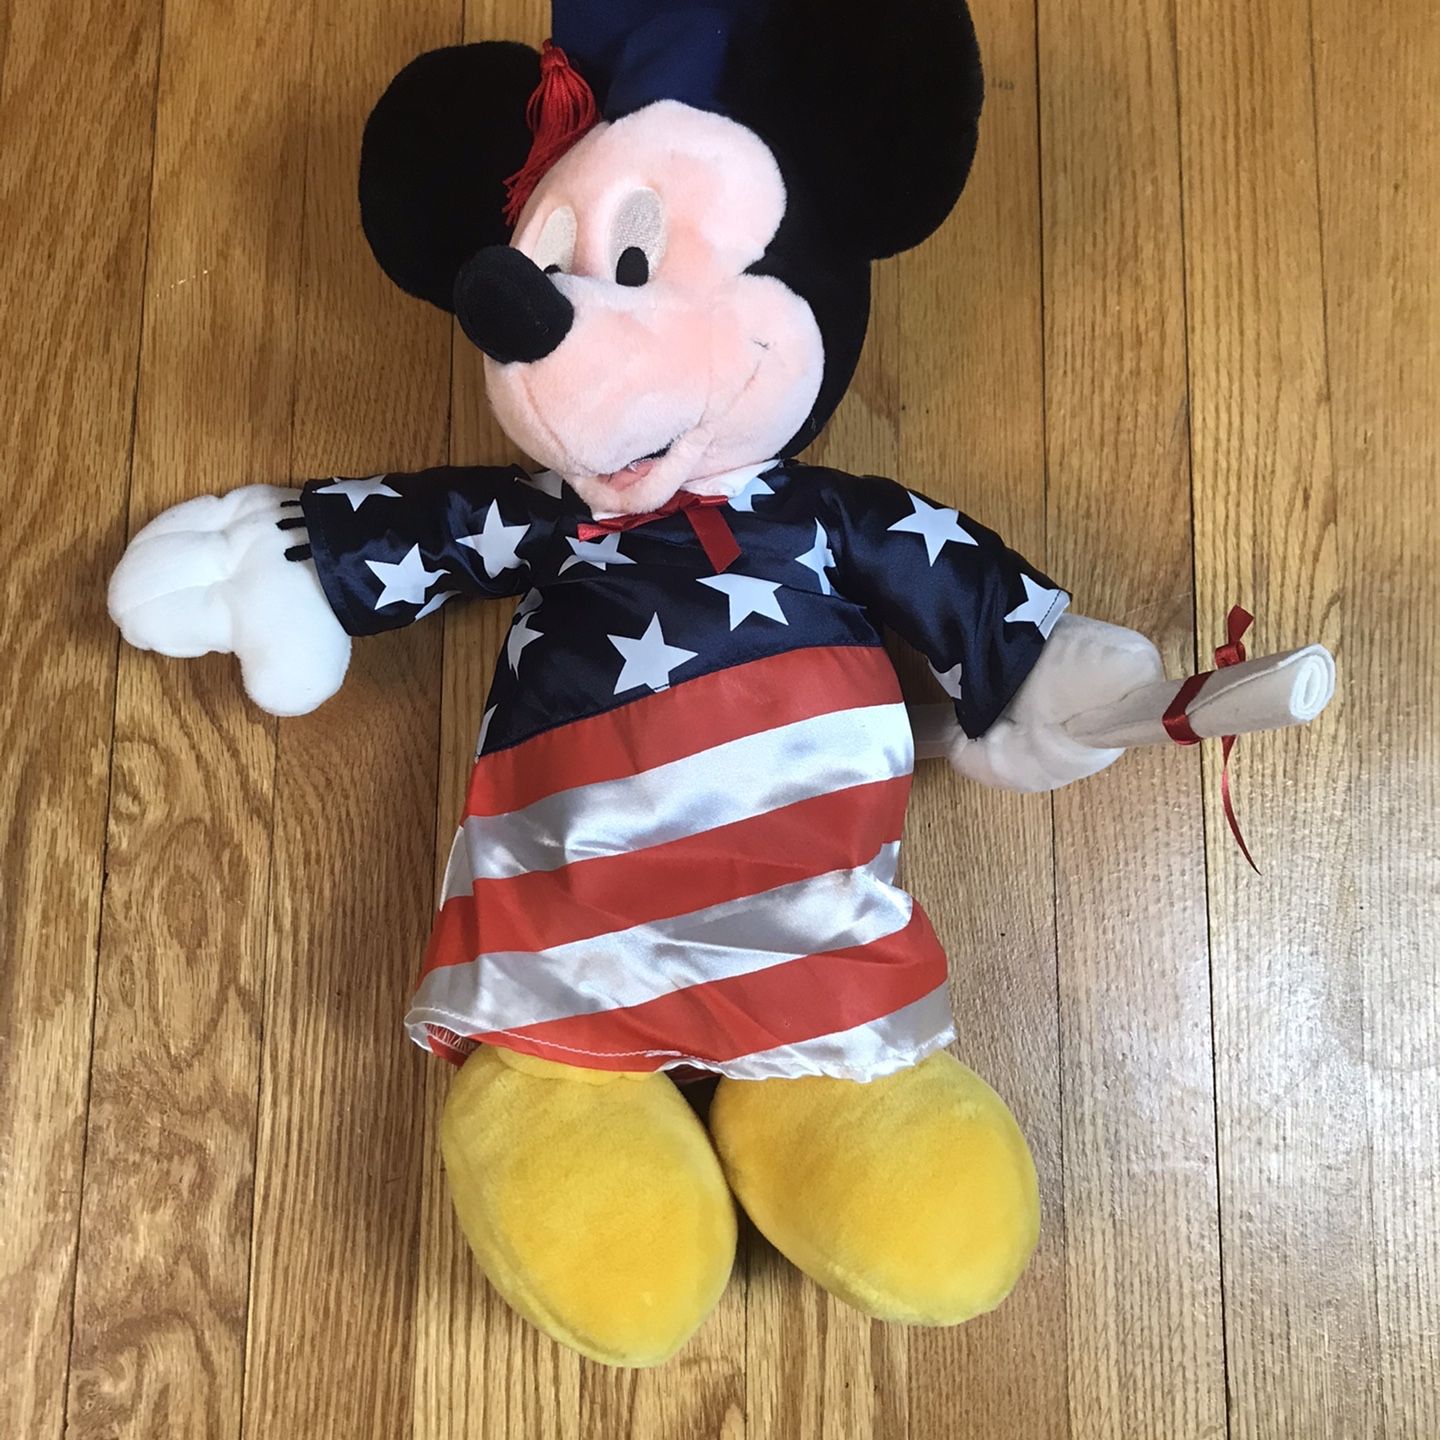 Disney Store, Graduation Mickey Mouse, 2003 American Flag Gown, Plush w/ diploma Pre-owned